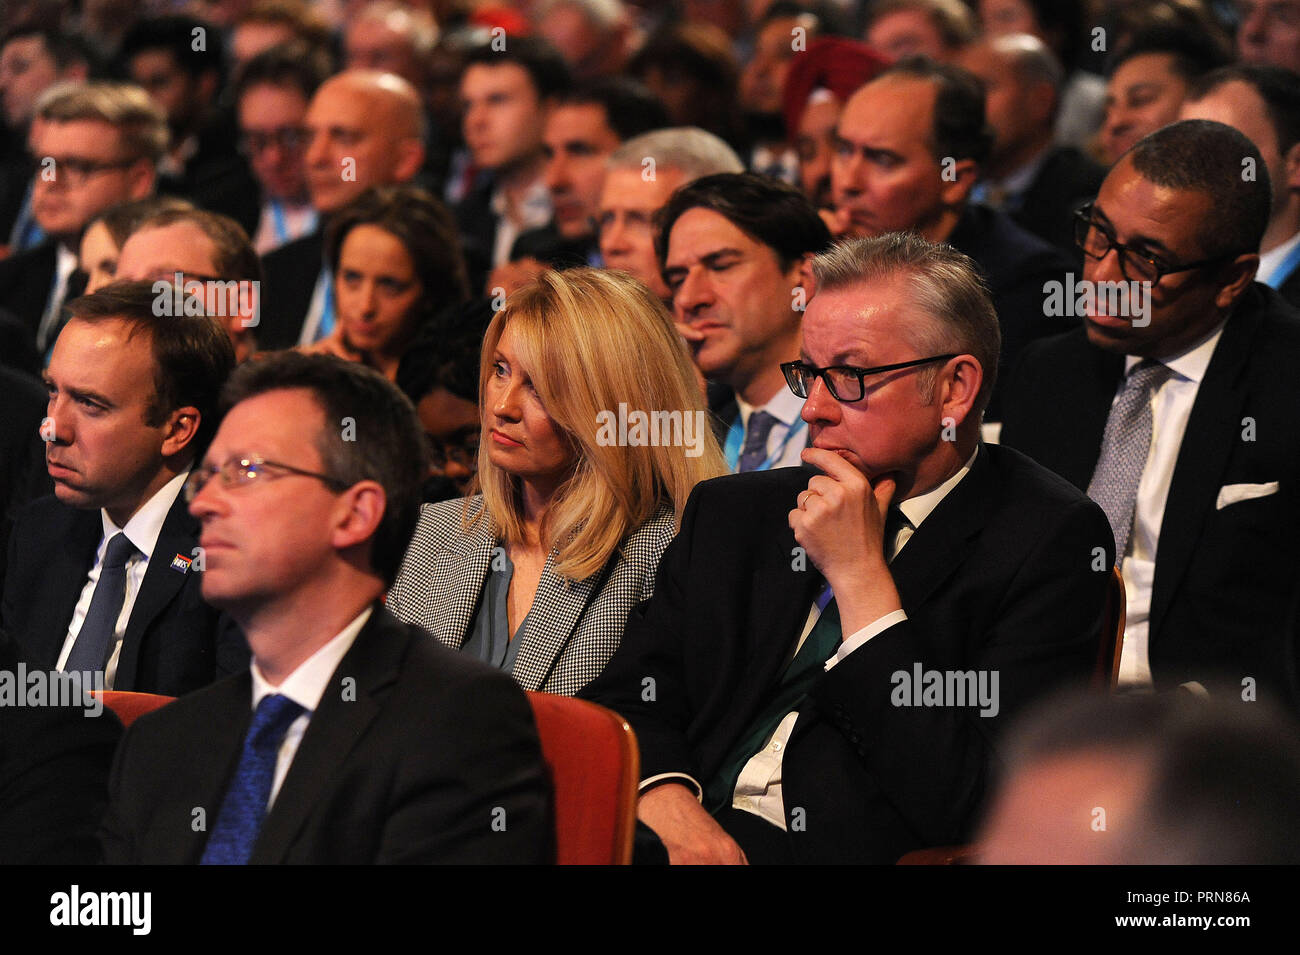 Birmingham, England. 3rd October, 2018.  L-R Esther McVey, Secretary of State for Work and Pensions and Michael Gove MP, Secretary of State for Environment, Food and Rural Affairs, listening to the keynote speech of Theresa May MP, Prime Minister and Leader of the Conservative Party, on the closing session of the fourth day of the Conservative Party annual conference at the ICC.  Kevin Hayes/Alamy Live News Stock Photo